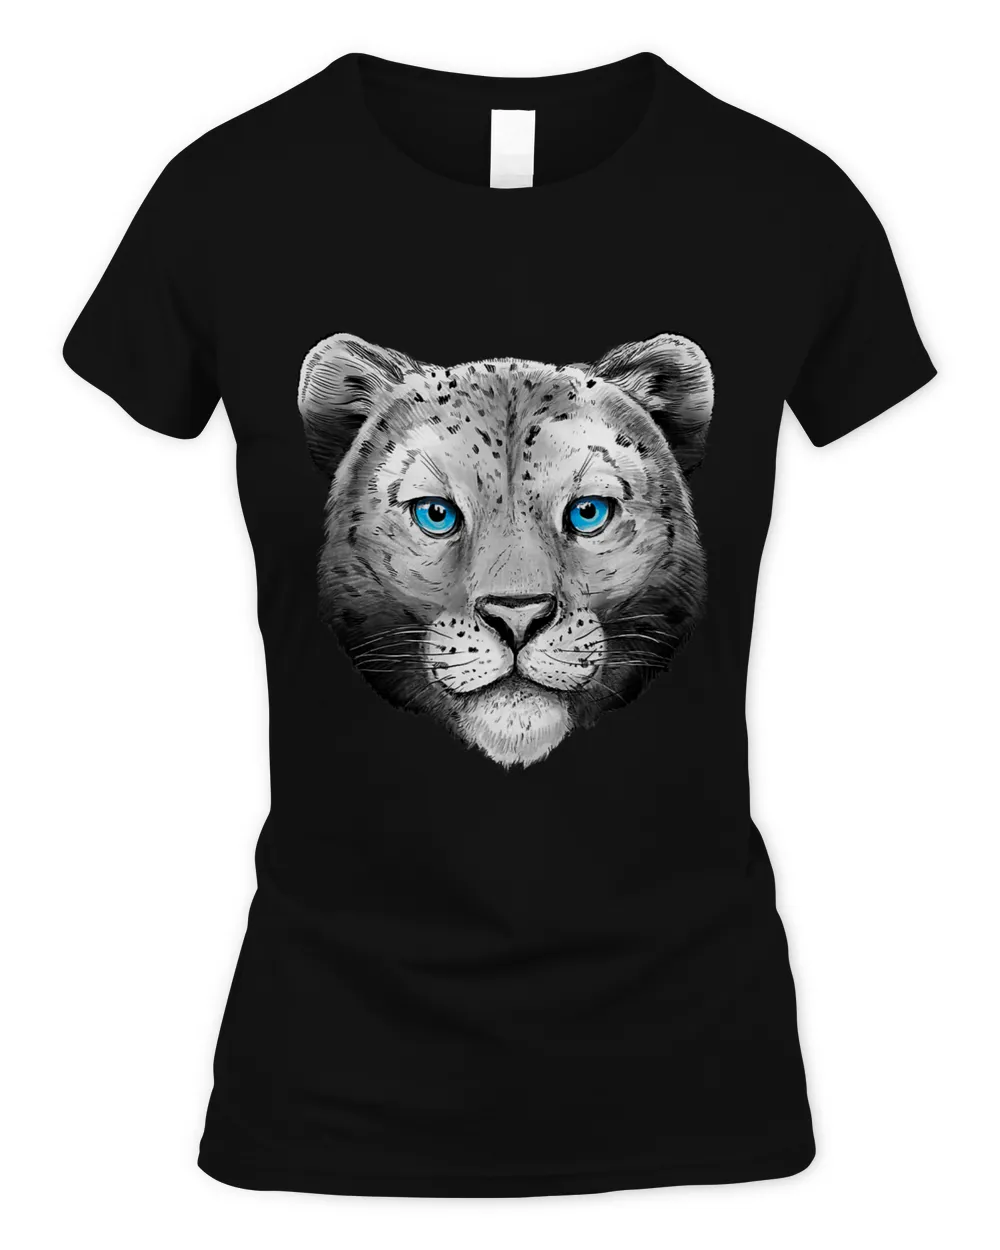 Panther Gift Big Cat Wild Animal Lover Zoo keeper